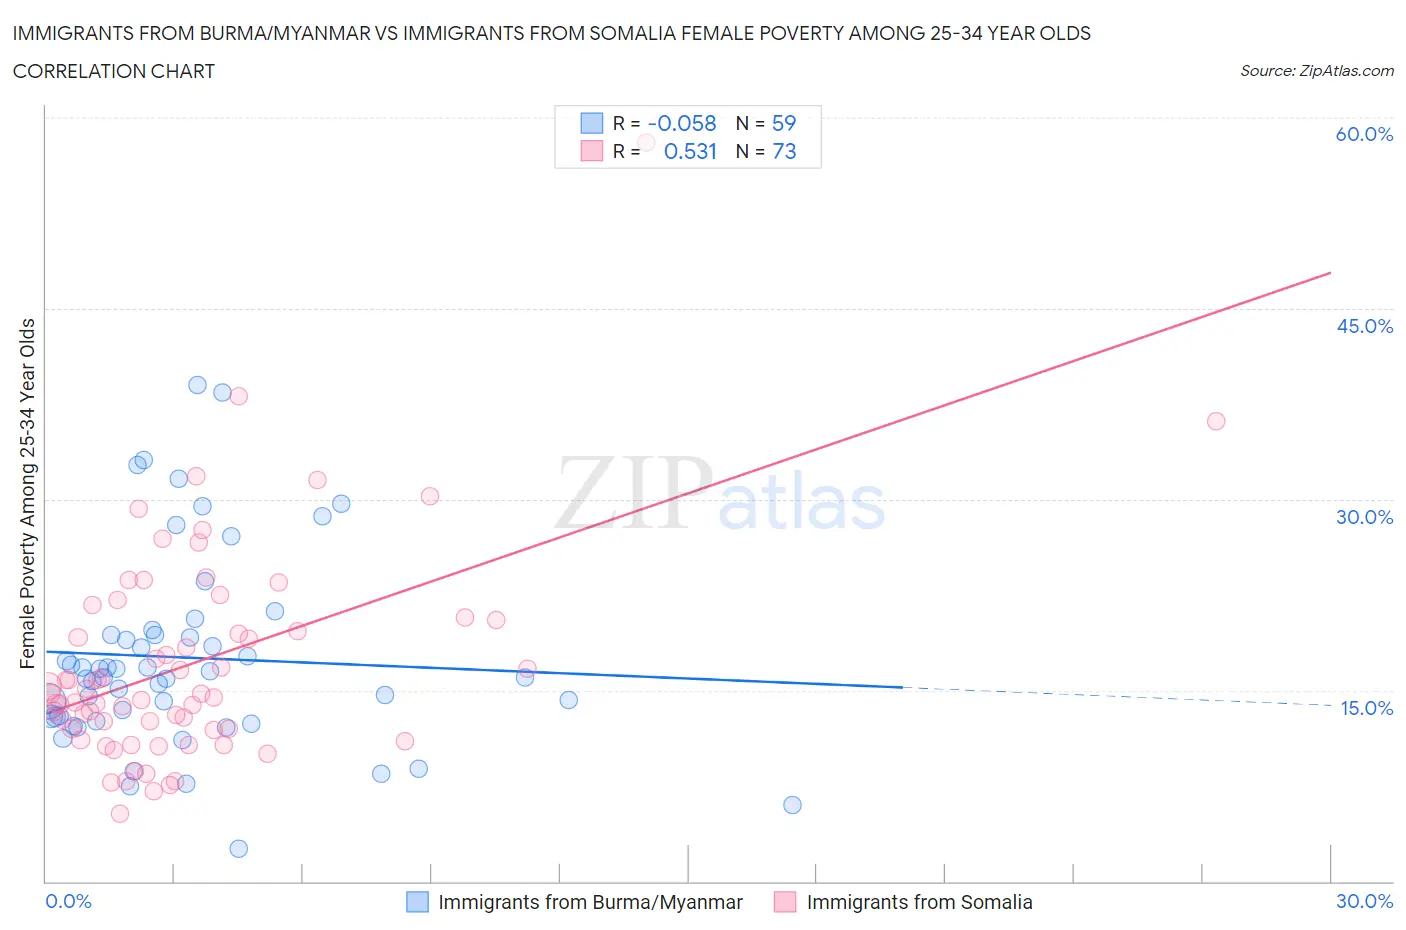 Immigrants from Burma/Myanmar vs Immigrants from Somalia Female Poverty Among 25-34 Year Olds